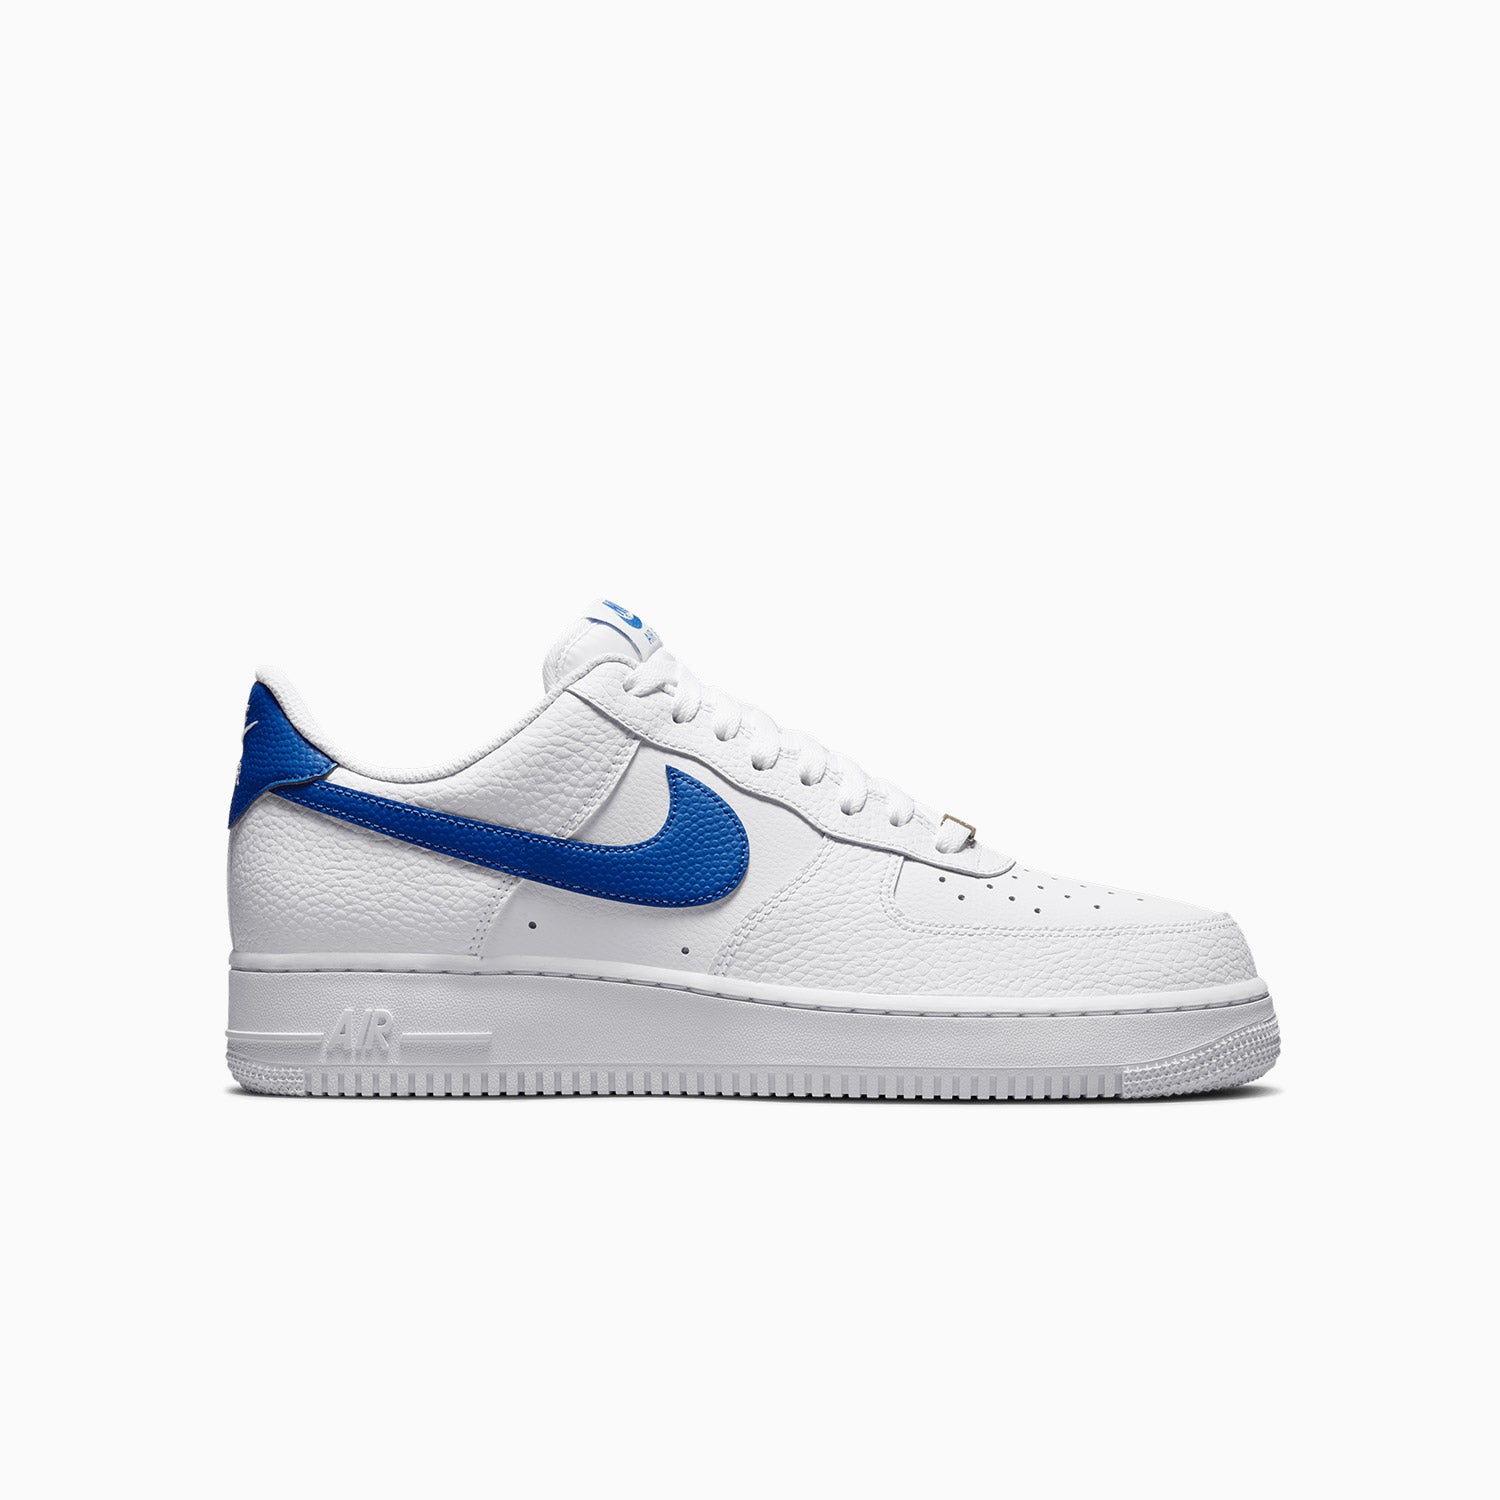 Nike Air Force 1 '07 Low sneakers in white and royal blue